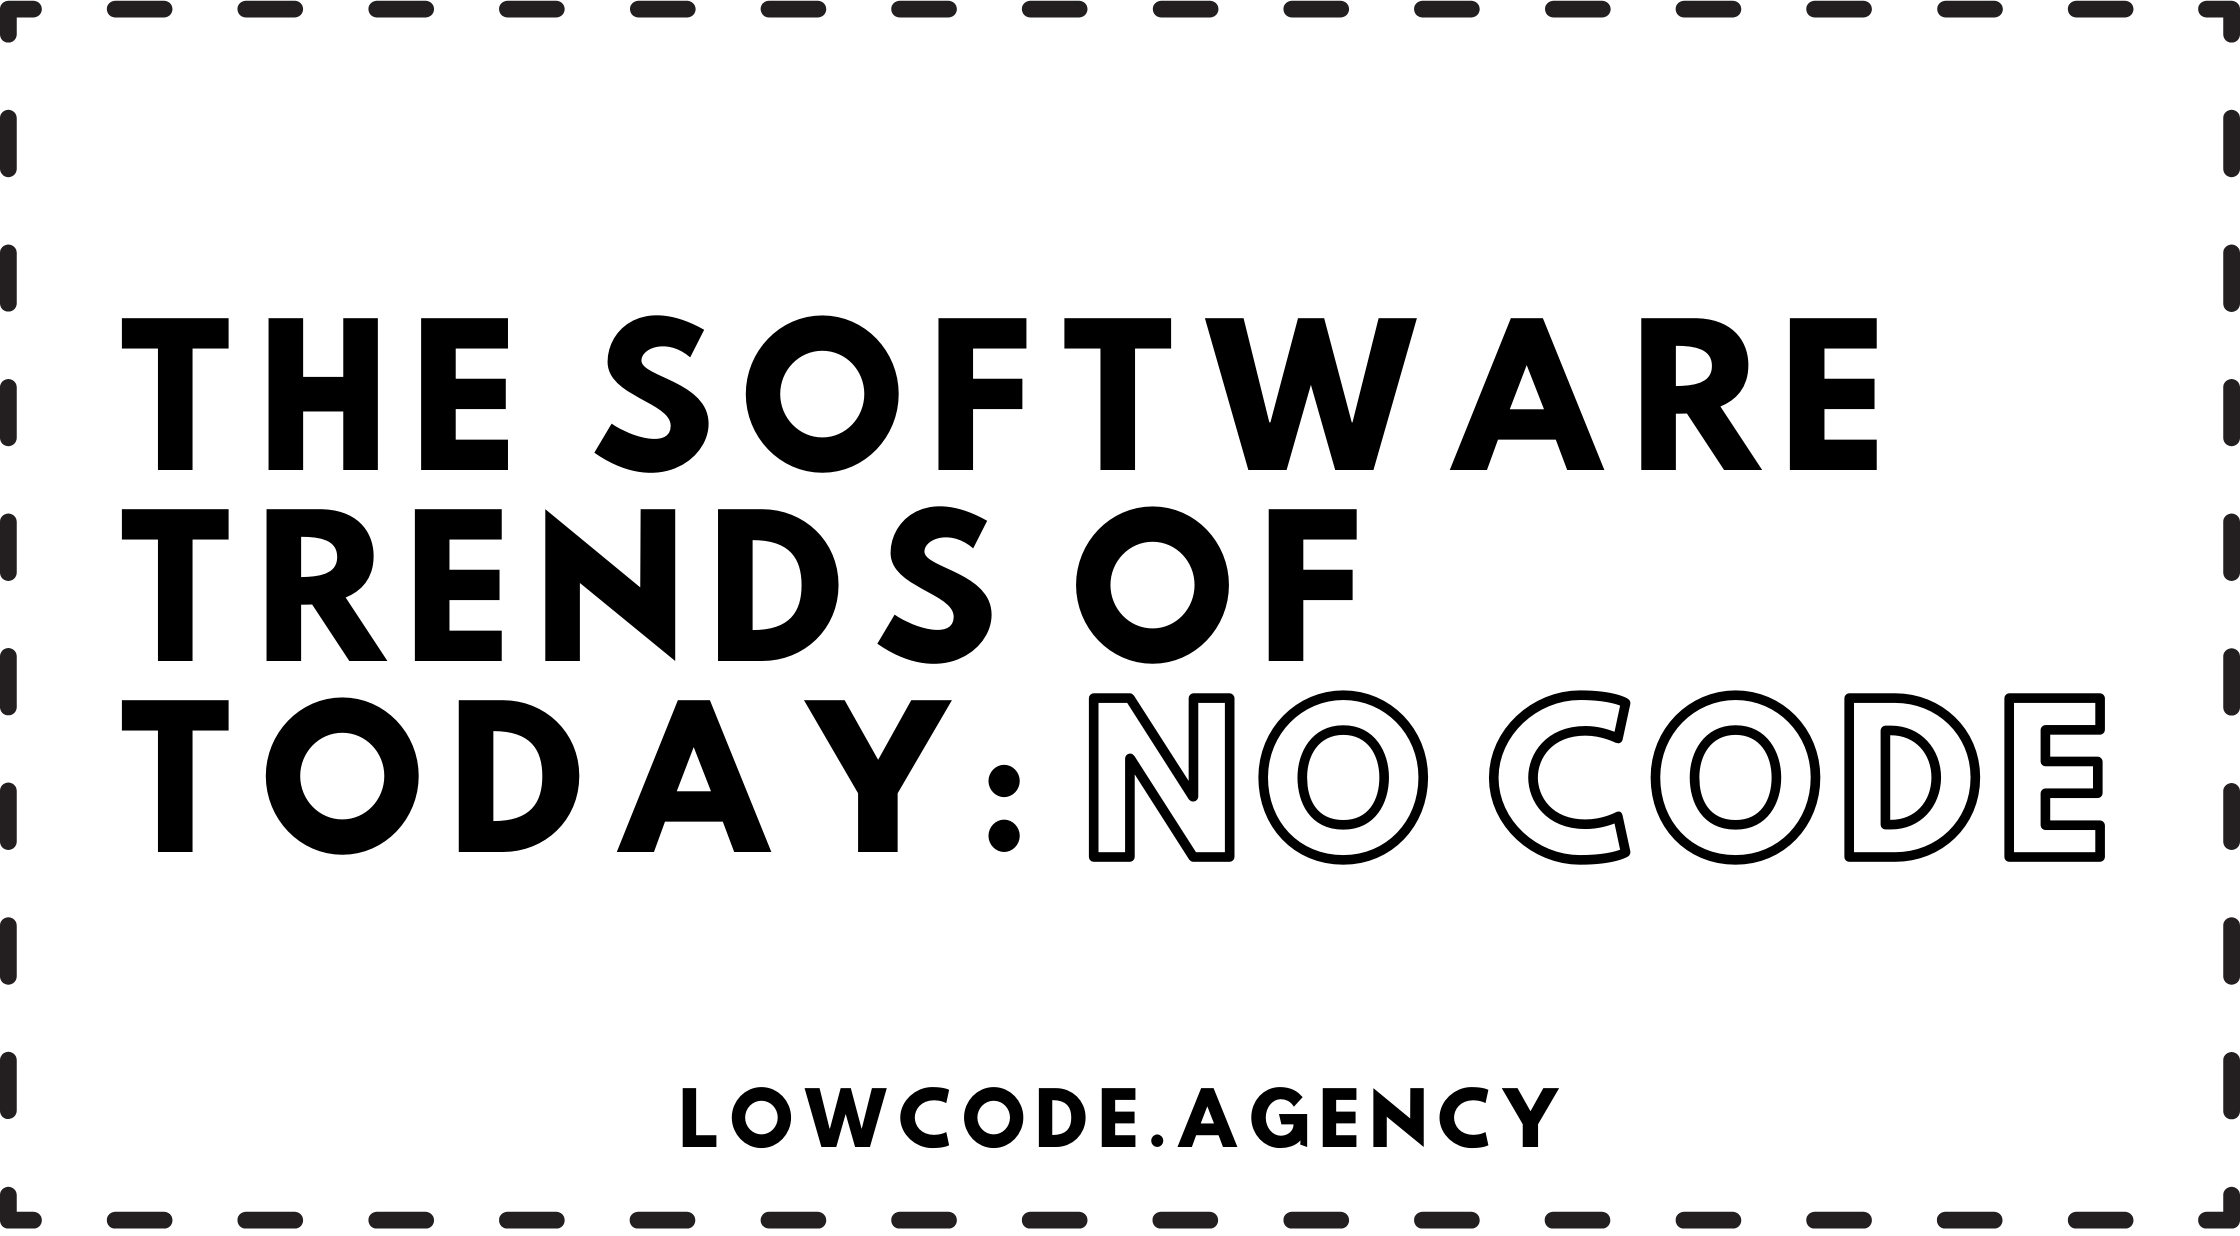 The software trends of today: no code 